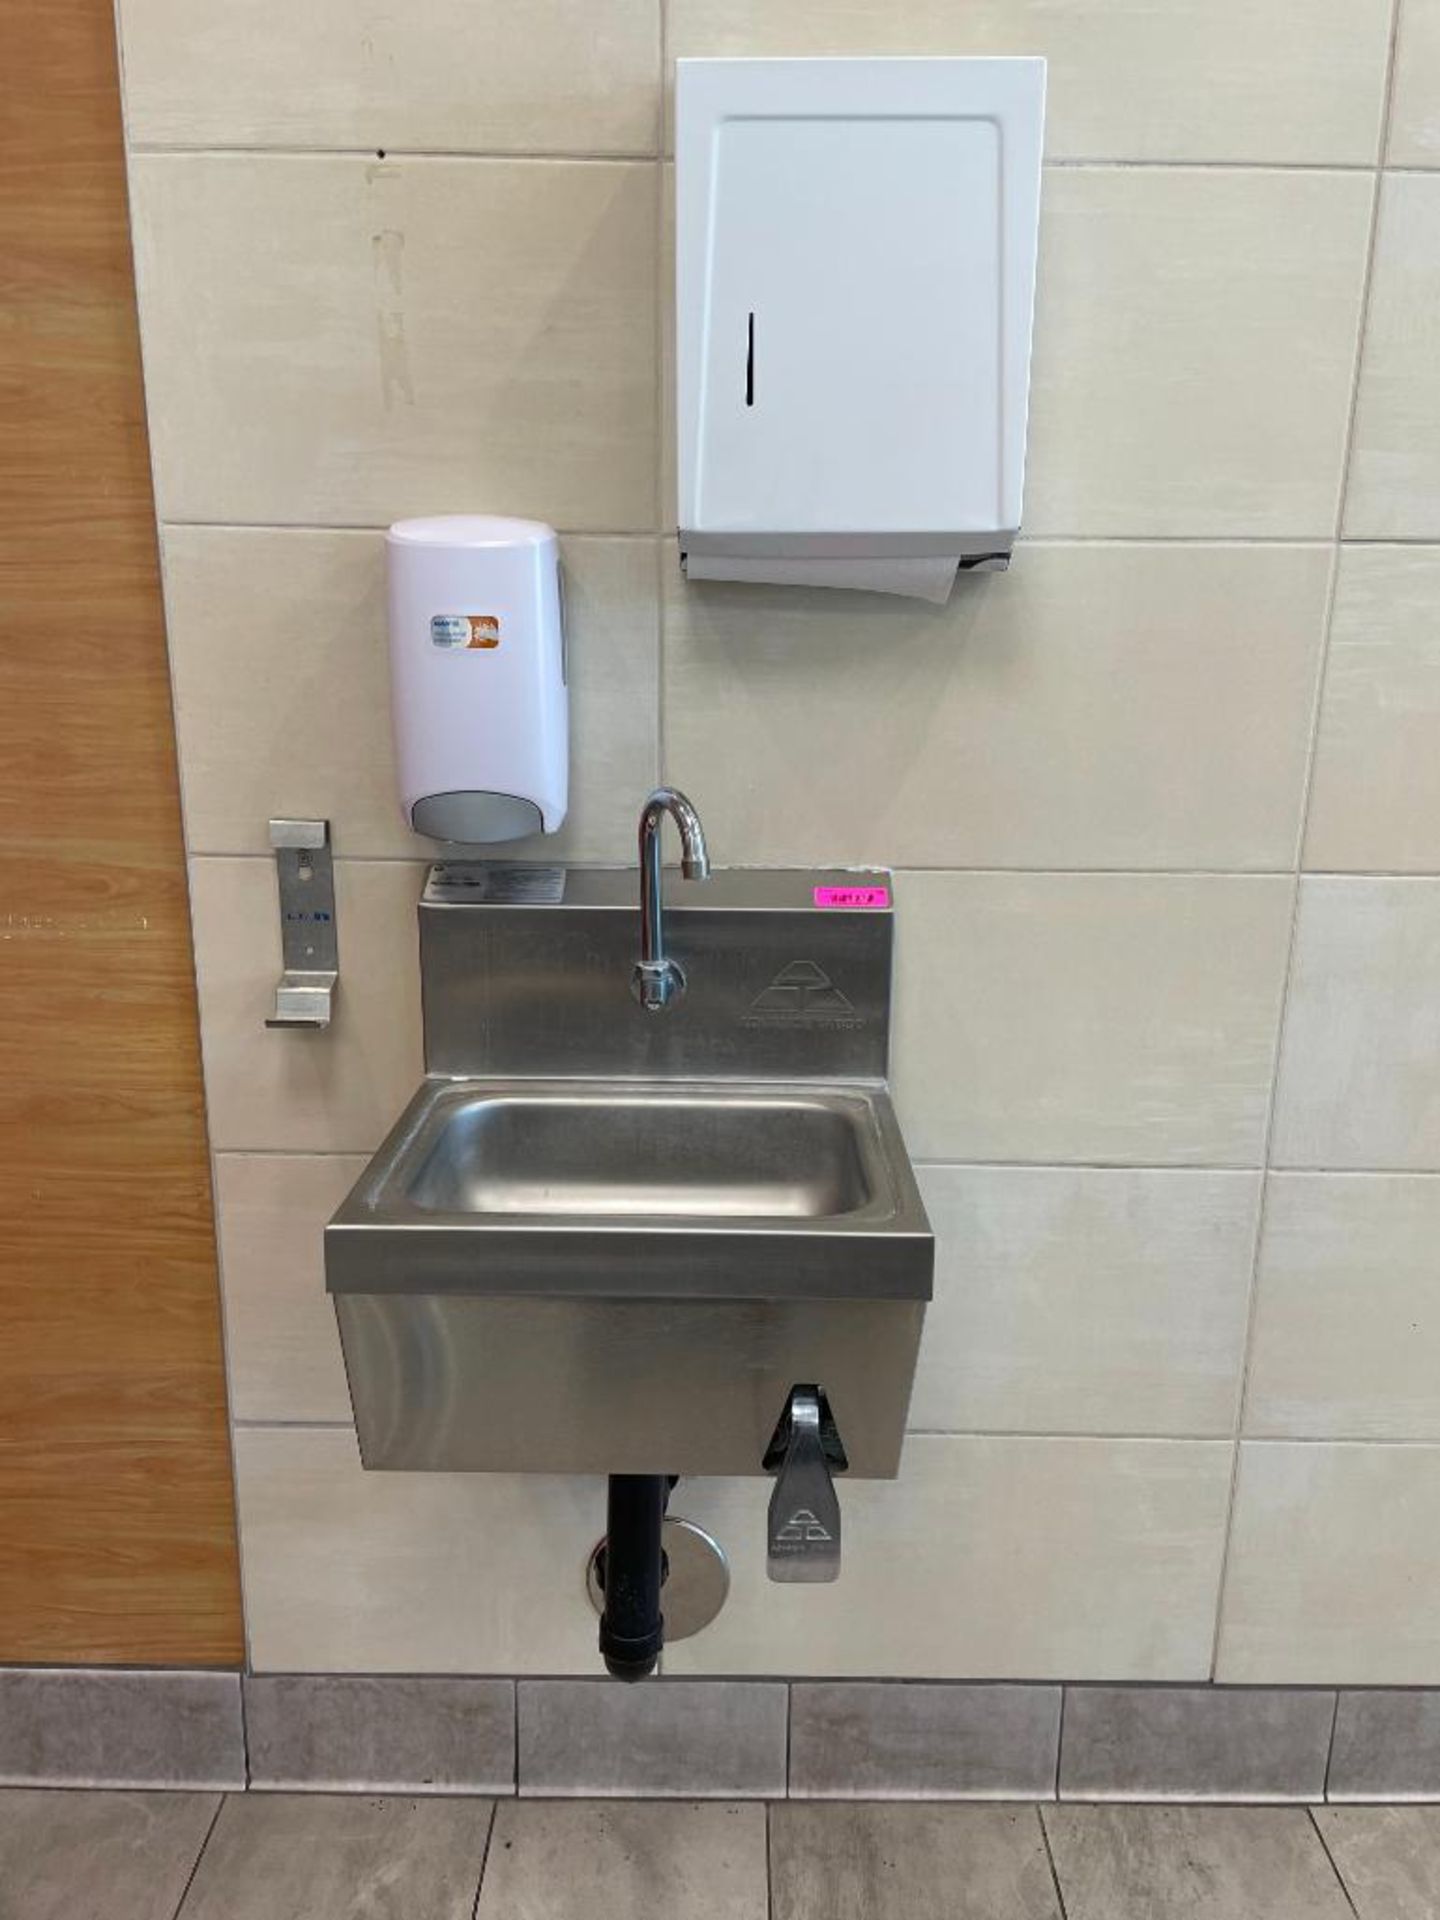 DESCRIPTION: 17" X 15" STAINLESS WALL-MOUNTED SINK W/ SOAP & PAPER TOWEL DISPENSERS SIZE: 17" X 15" - Image 3 of 8